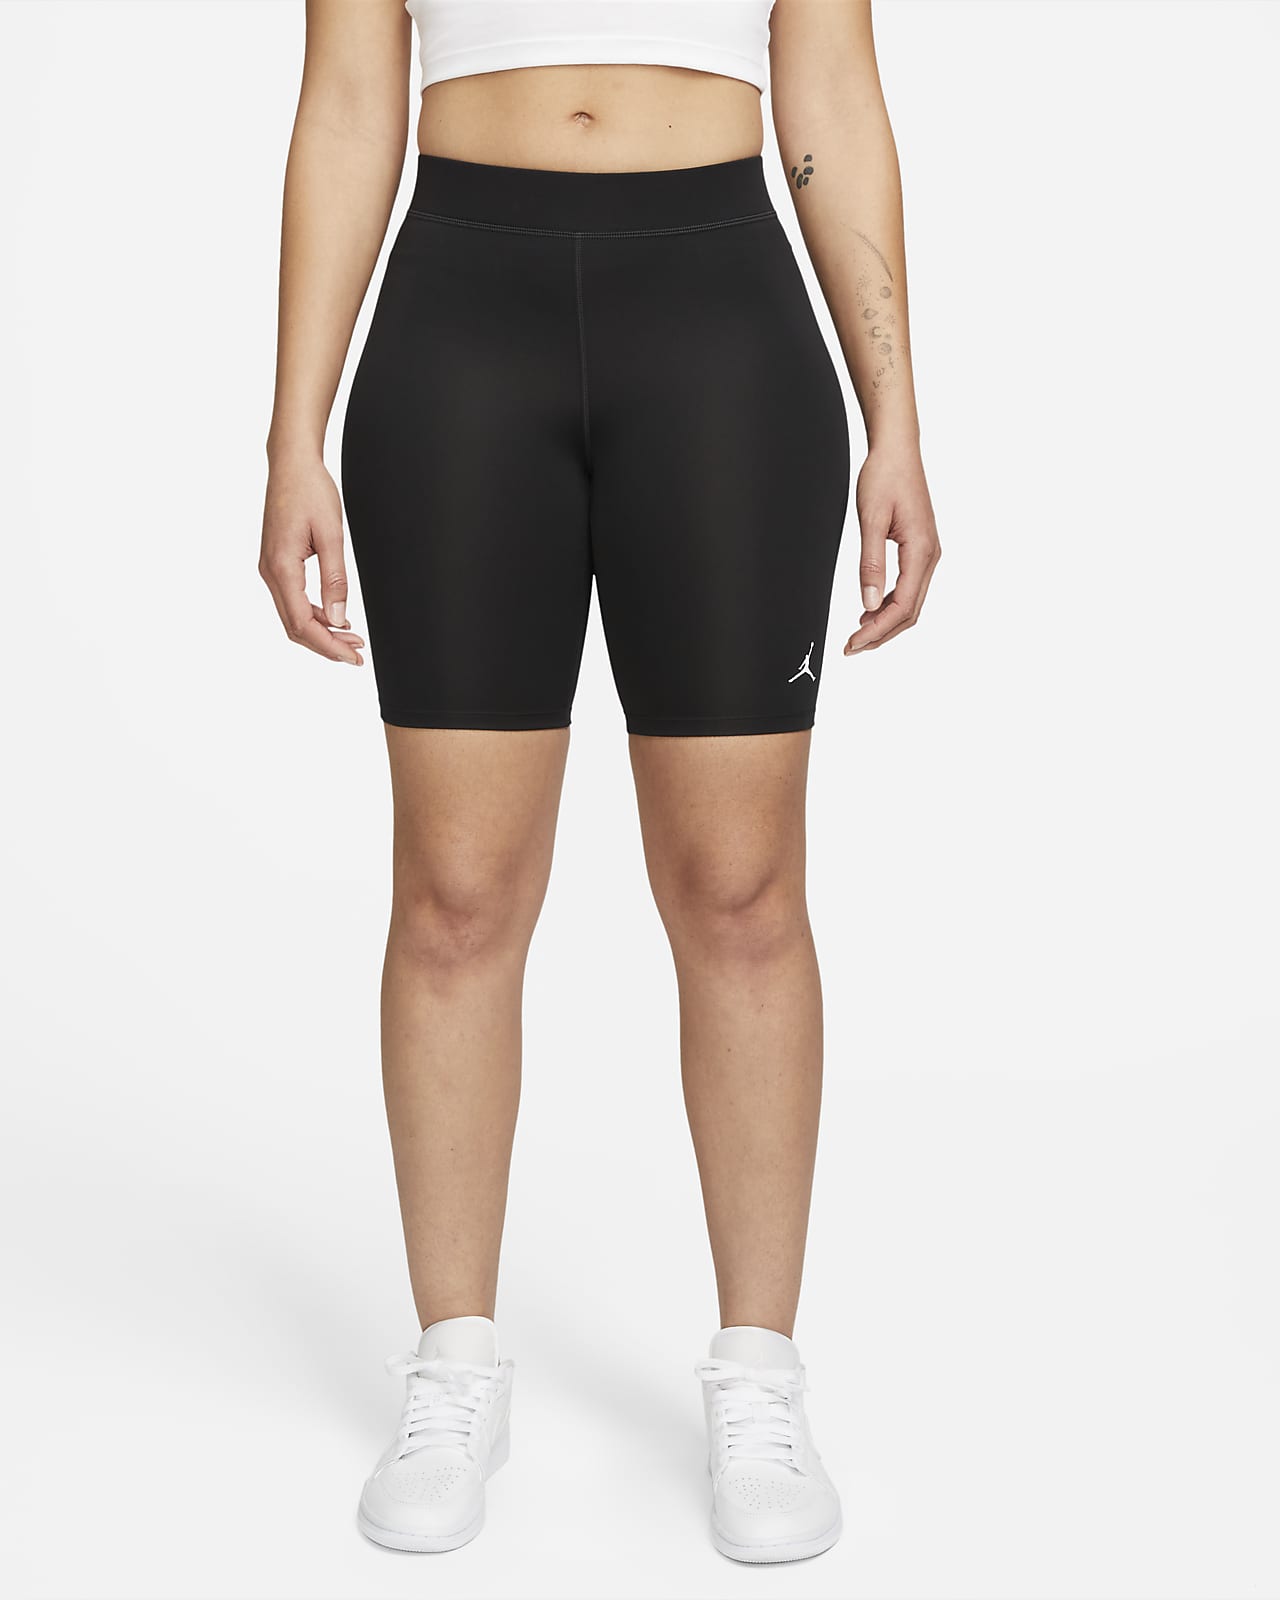 nike shorts and leggings Online Sale, UP TO 57% OFF